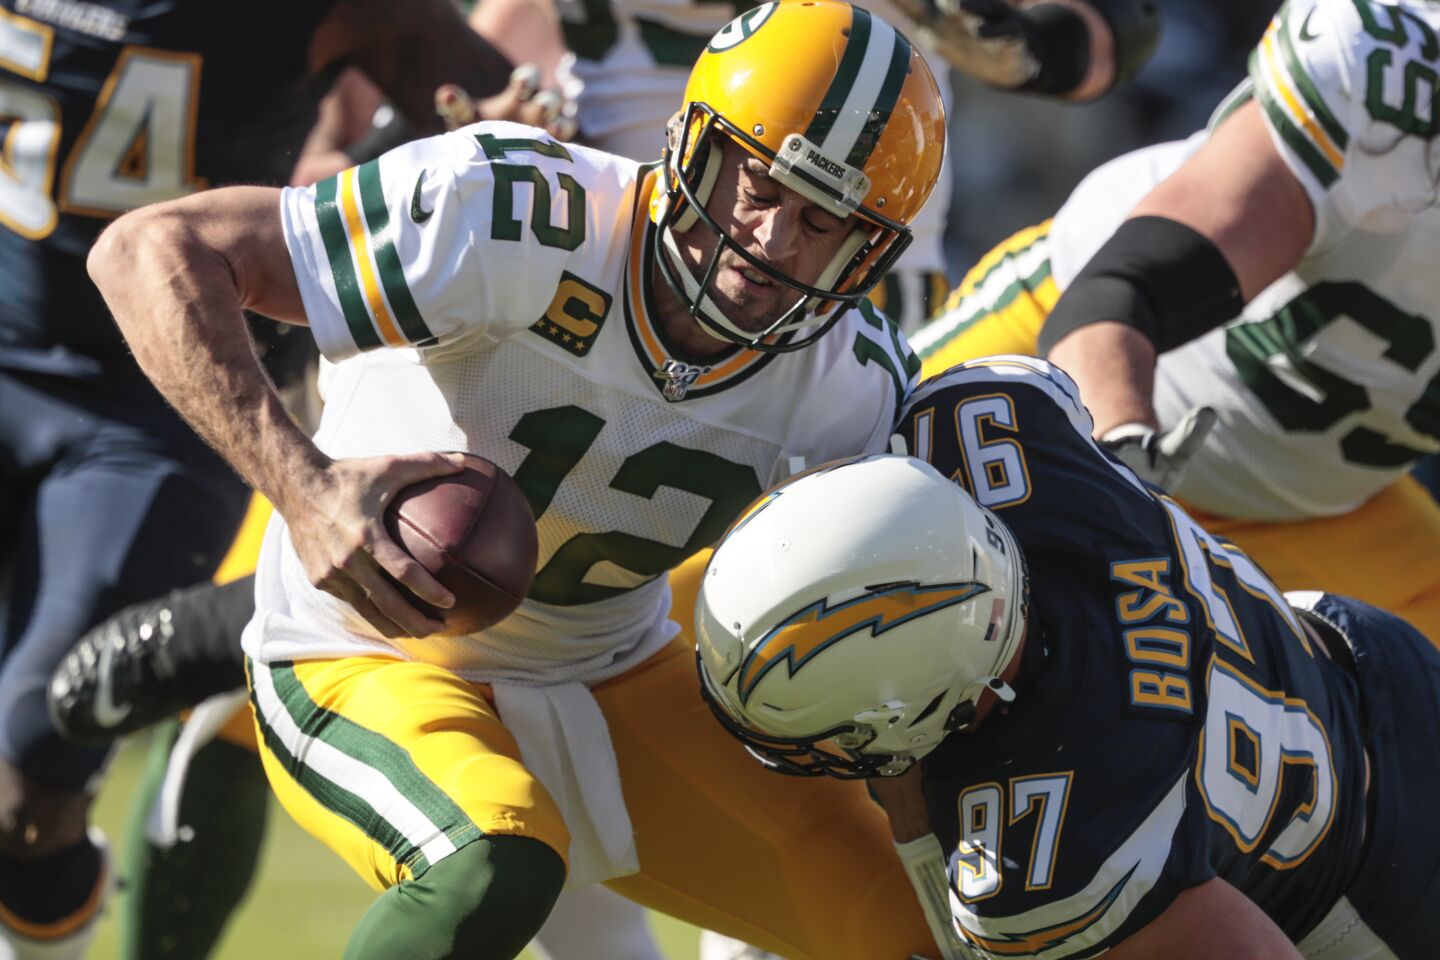 Chargers defensive end Joey Bosa sacks Packers quarter Aaron Rodgers.